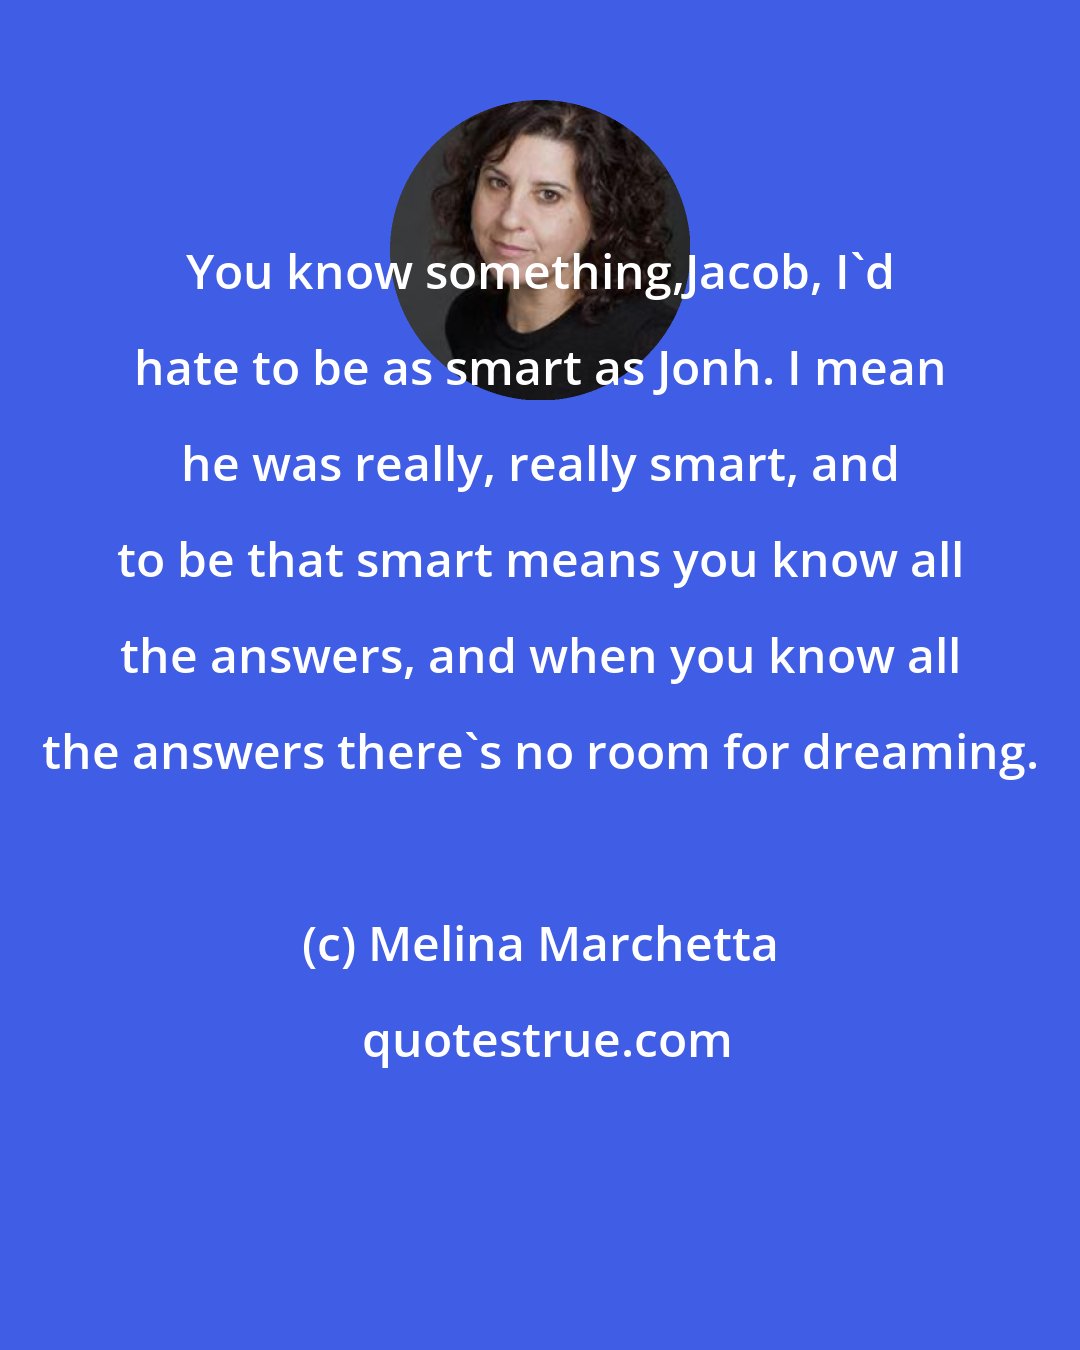 Melina Marchetta: You know something,Jacob, I'd hate to be as smart as Jonh. I mean he was really, really smart, and to be that smart means you know all the answers, and when you know all the answers there's no room for dreaming.